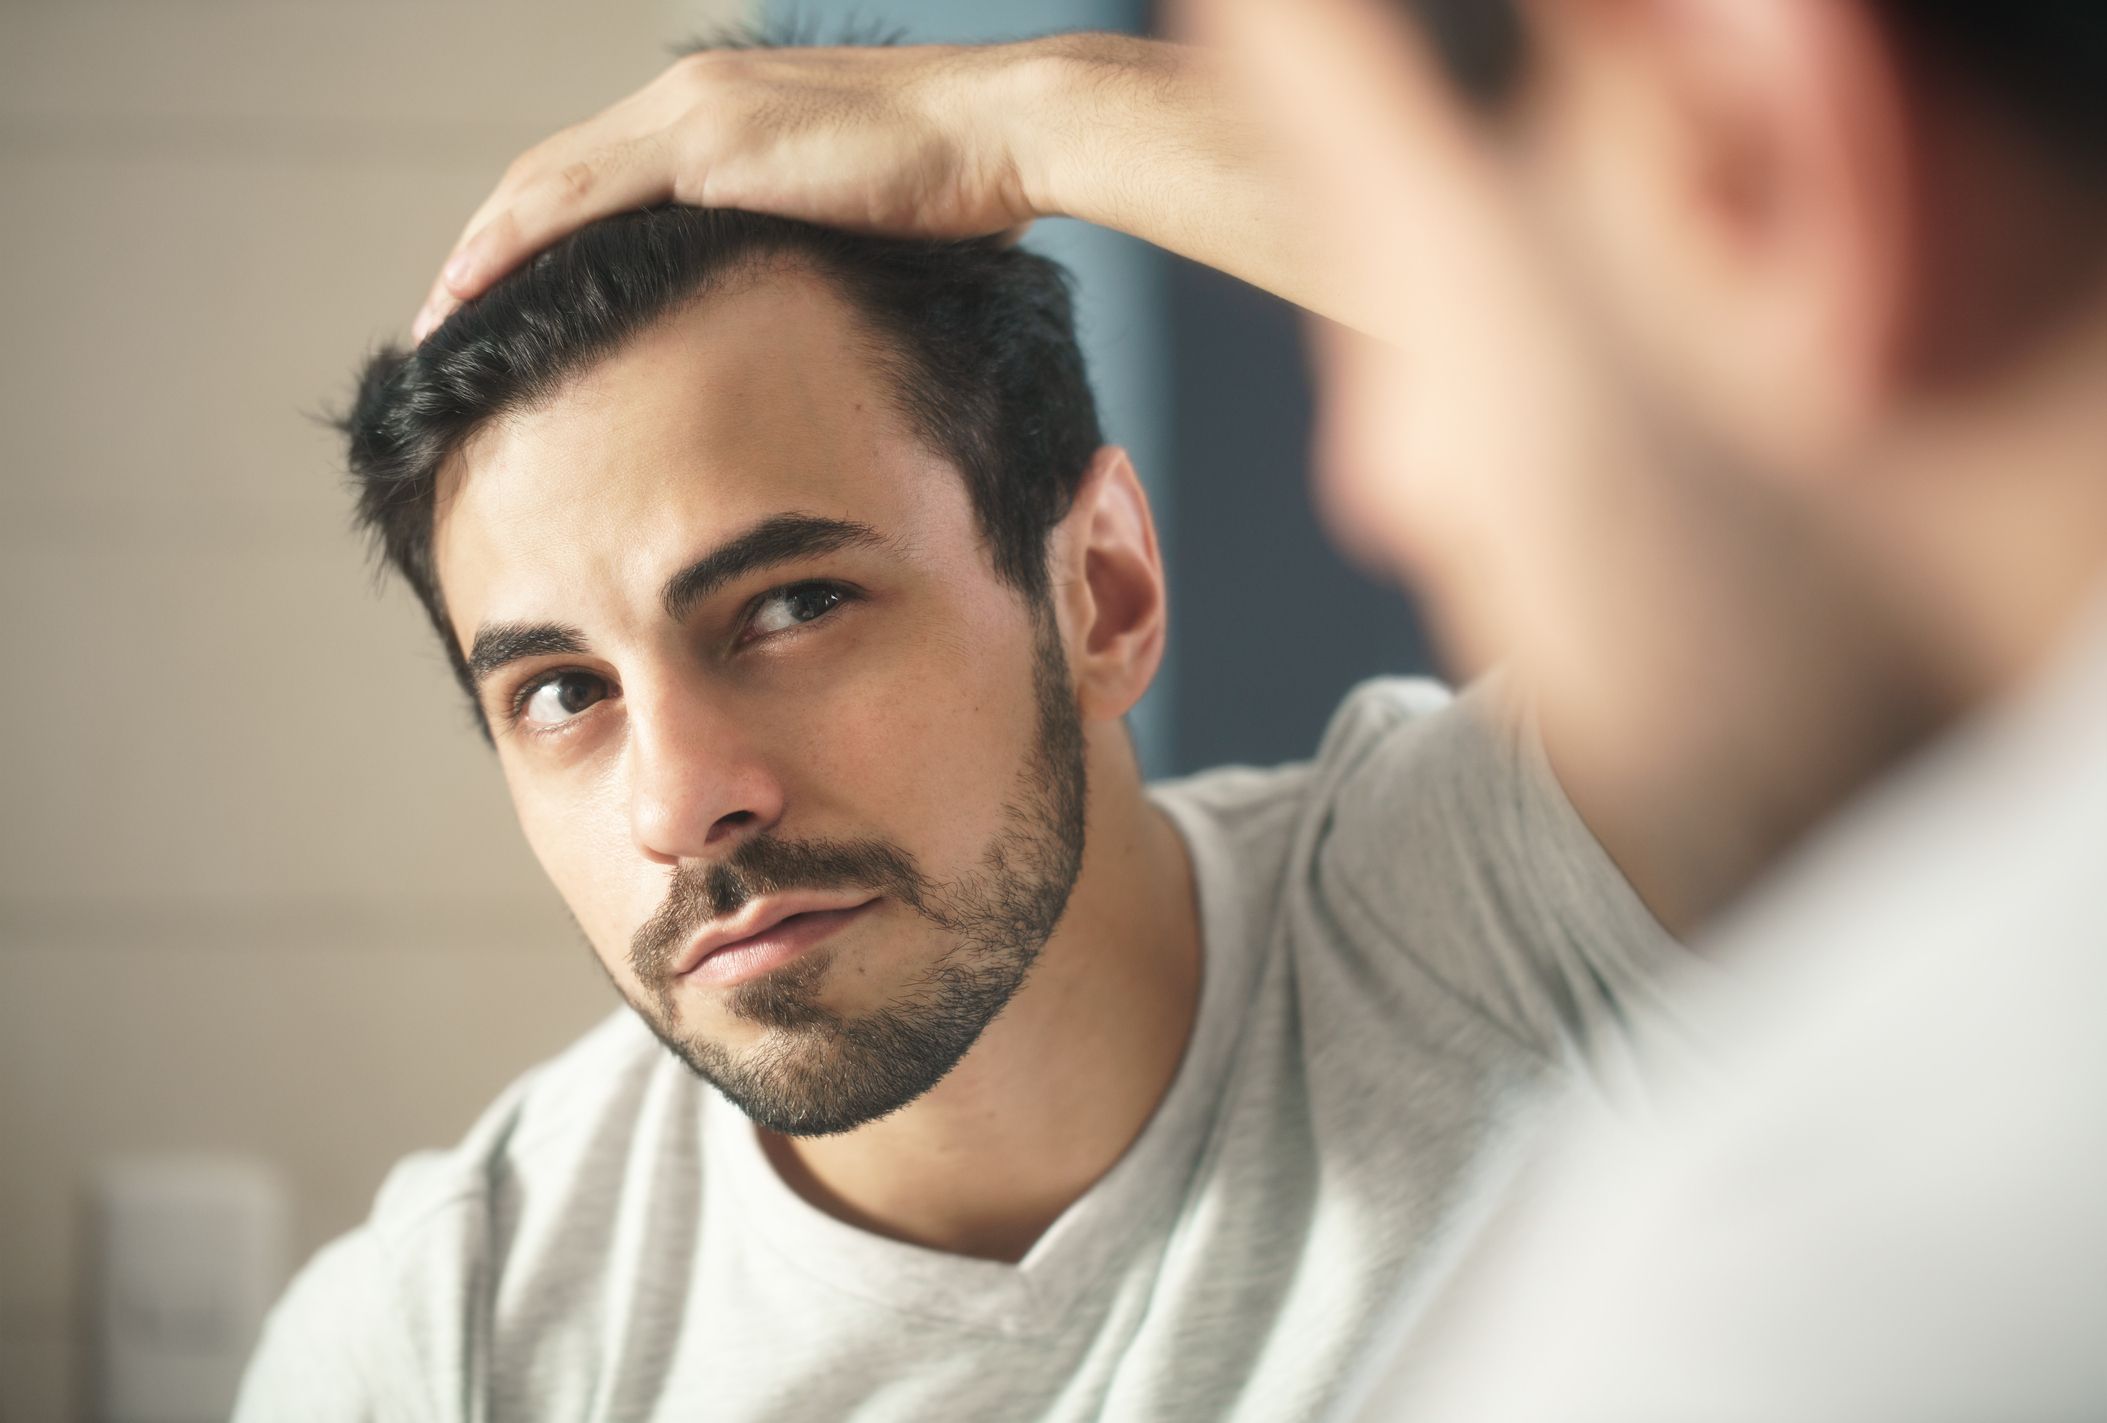 8 Ways to Stop Hair Loss - Treatments and Prevention